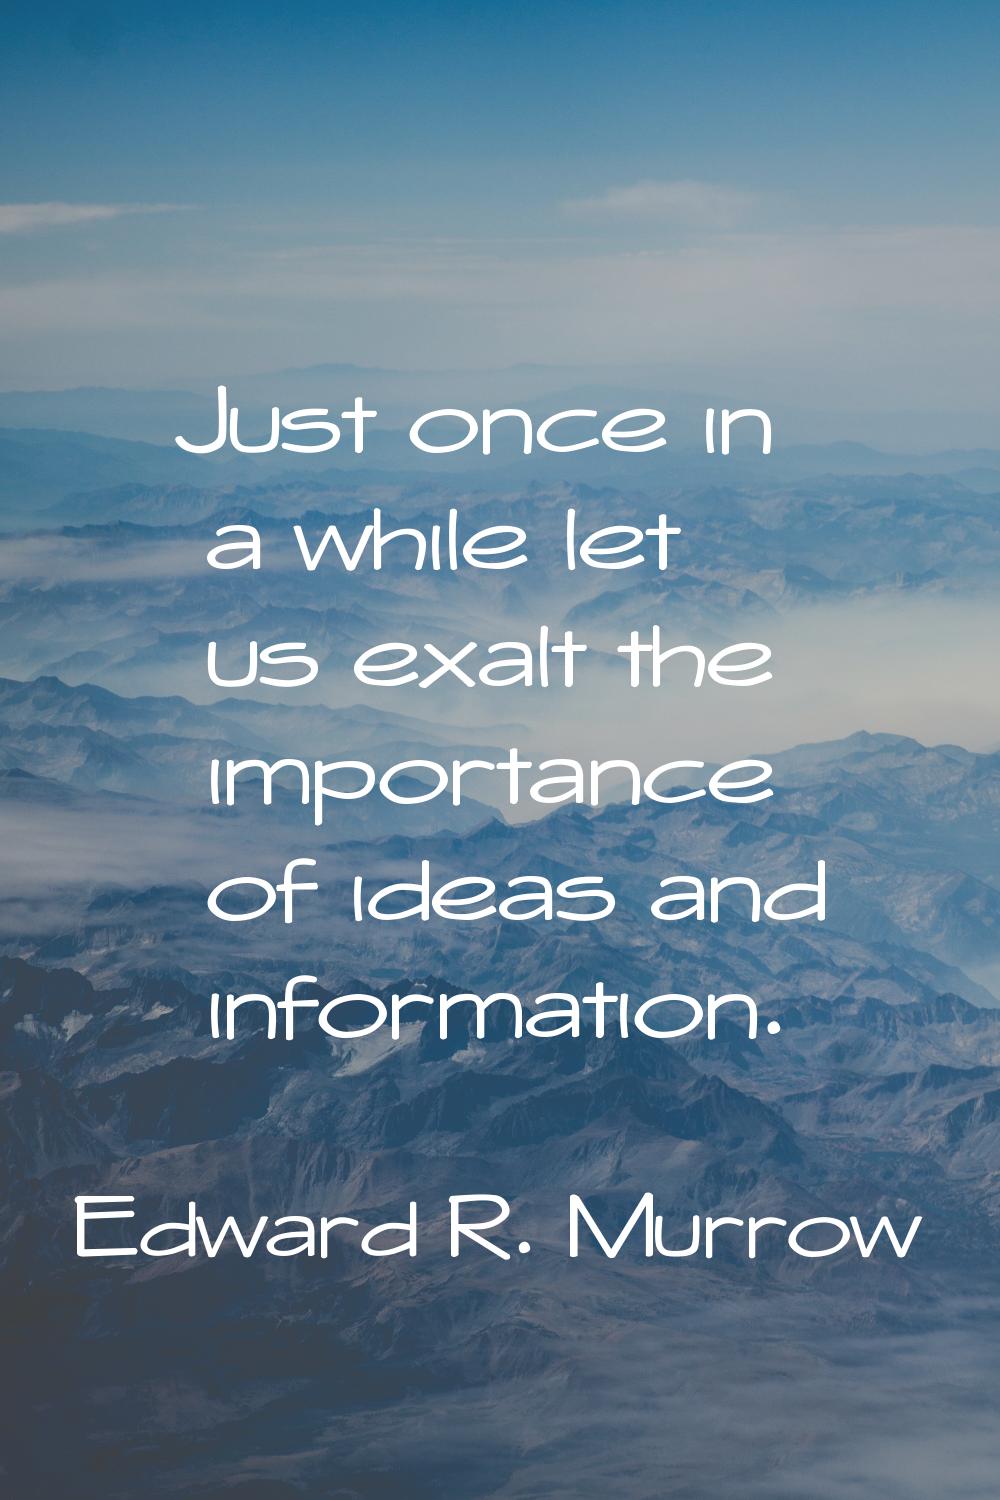 Just once in a while let us exalt the importance of ideas and information.